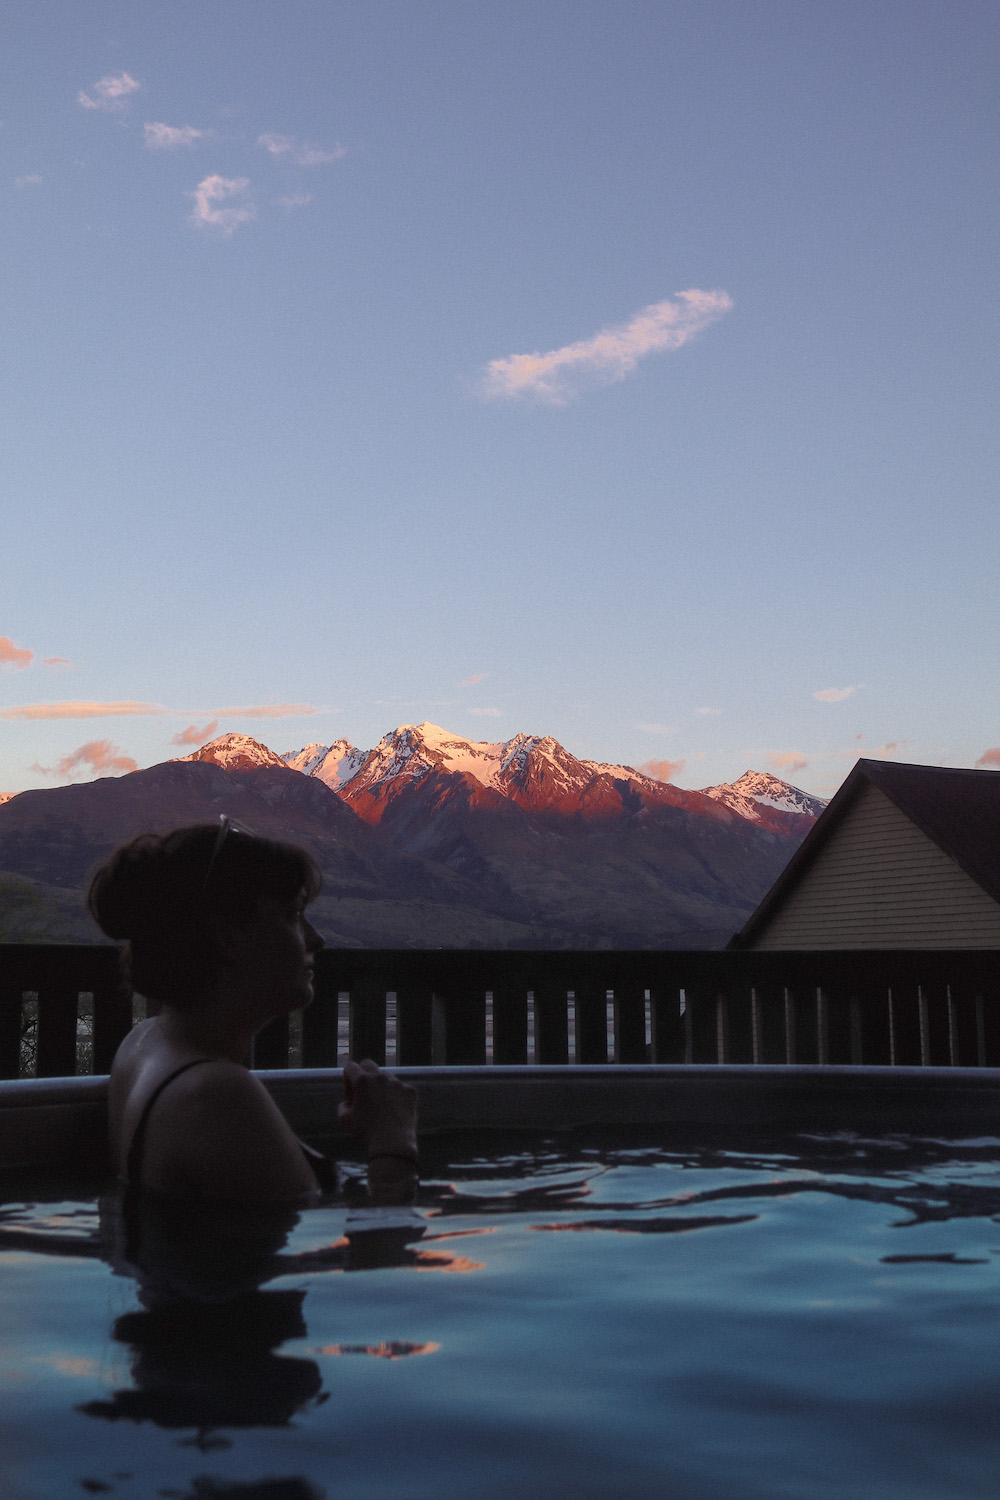 Sitting in a warm hot tub overlooking the pink sky and distant mountains